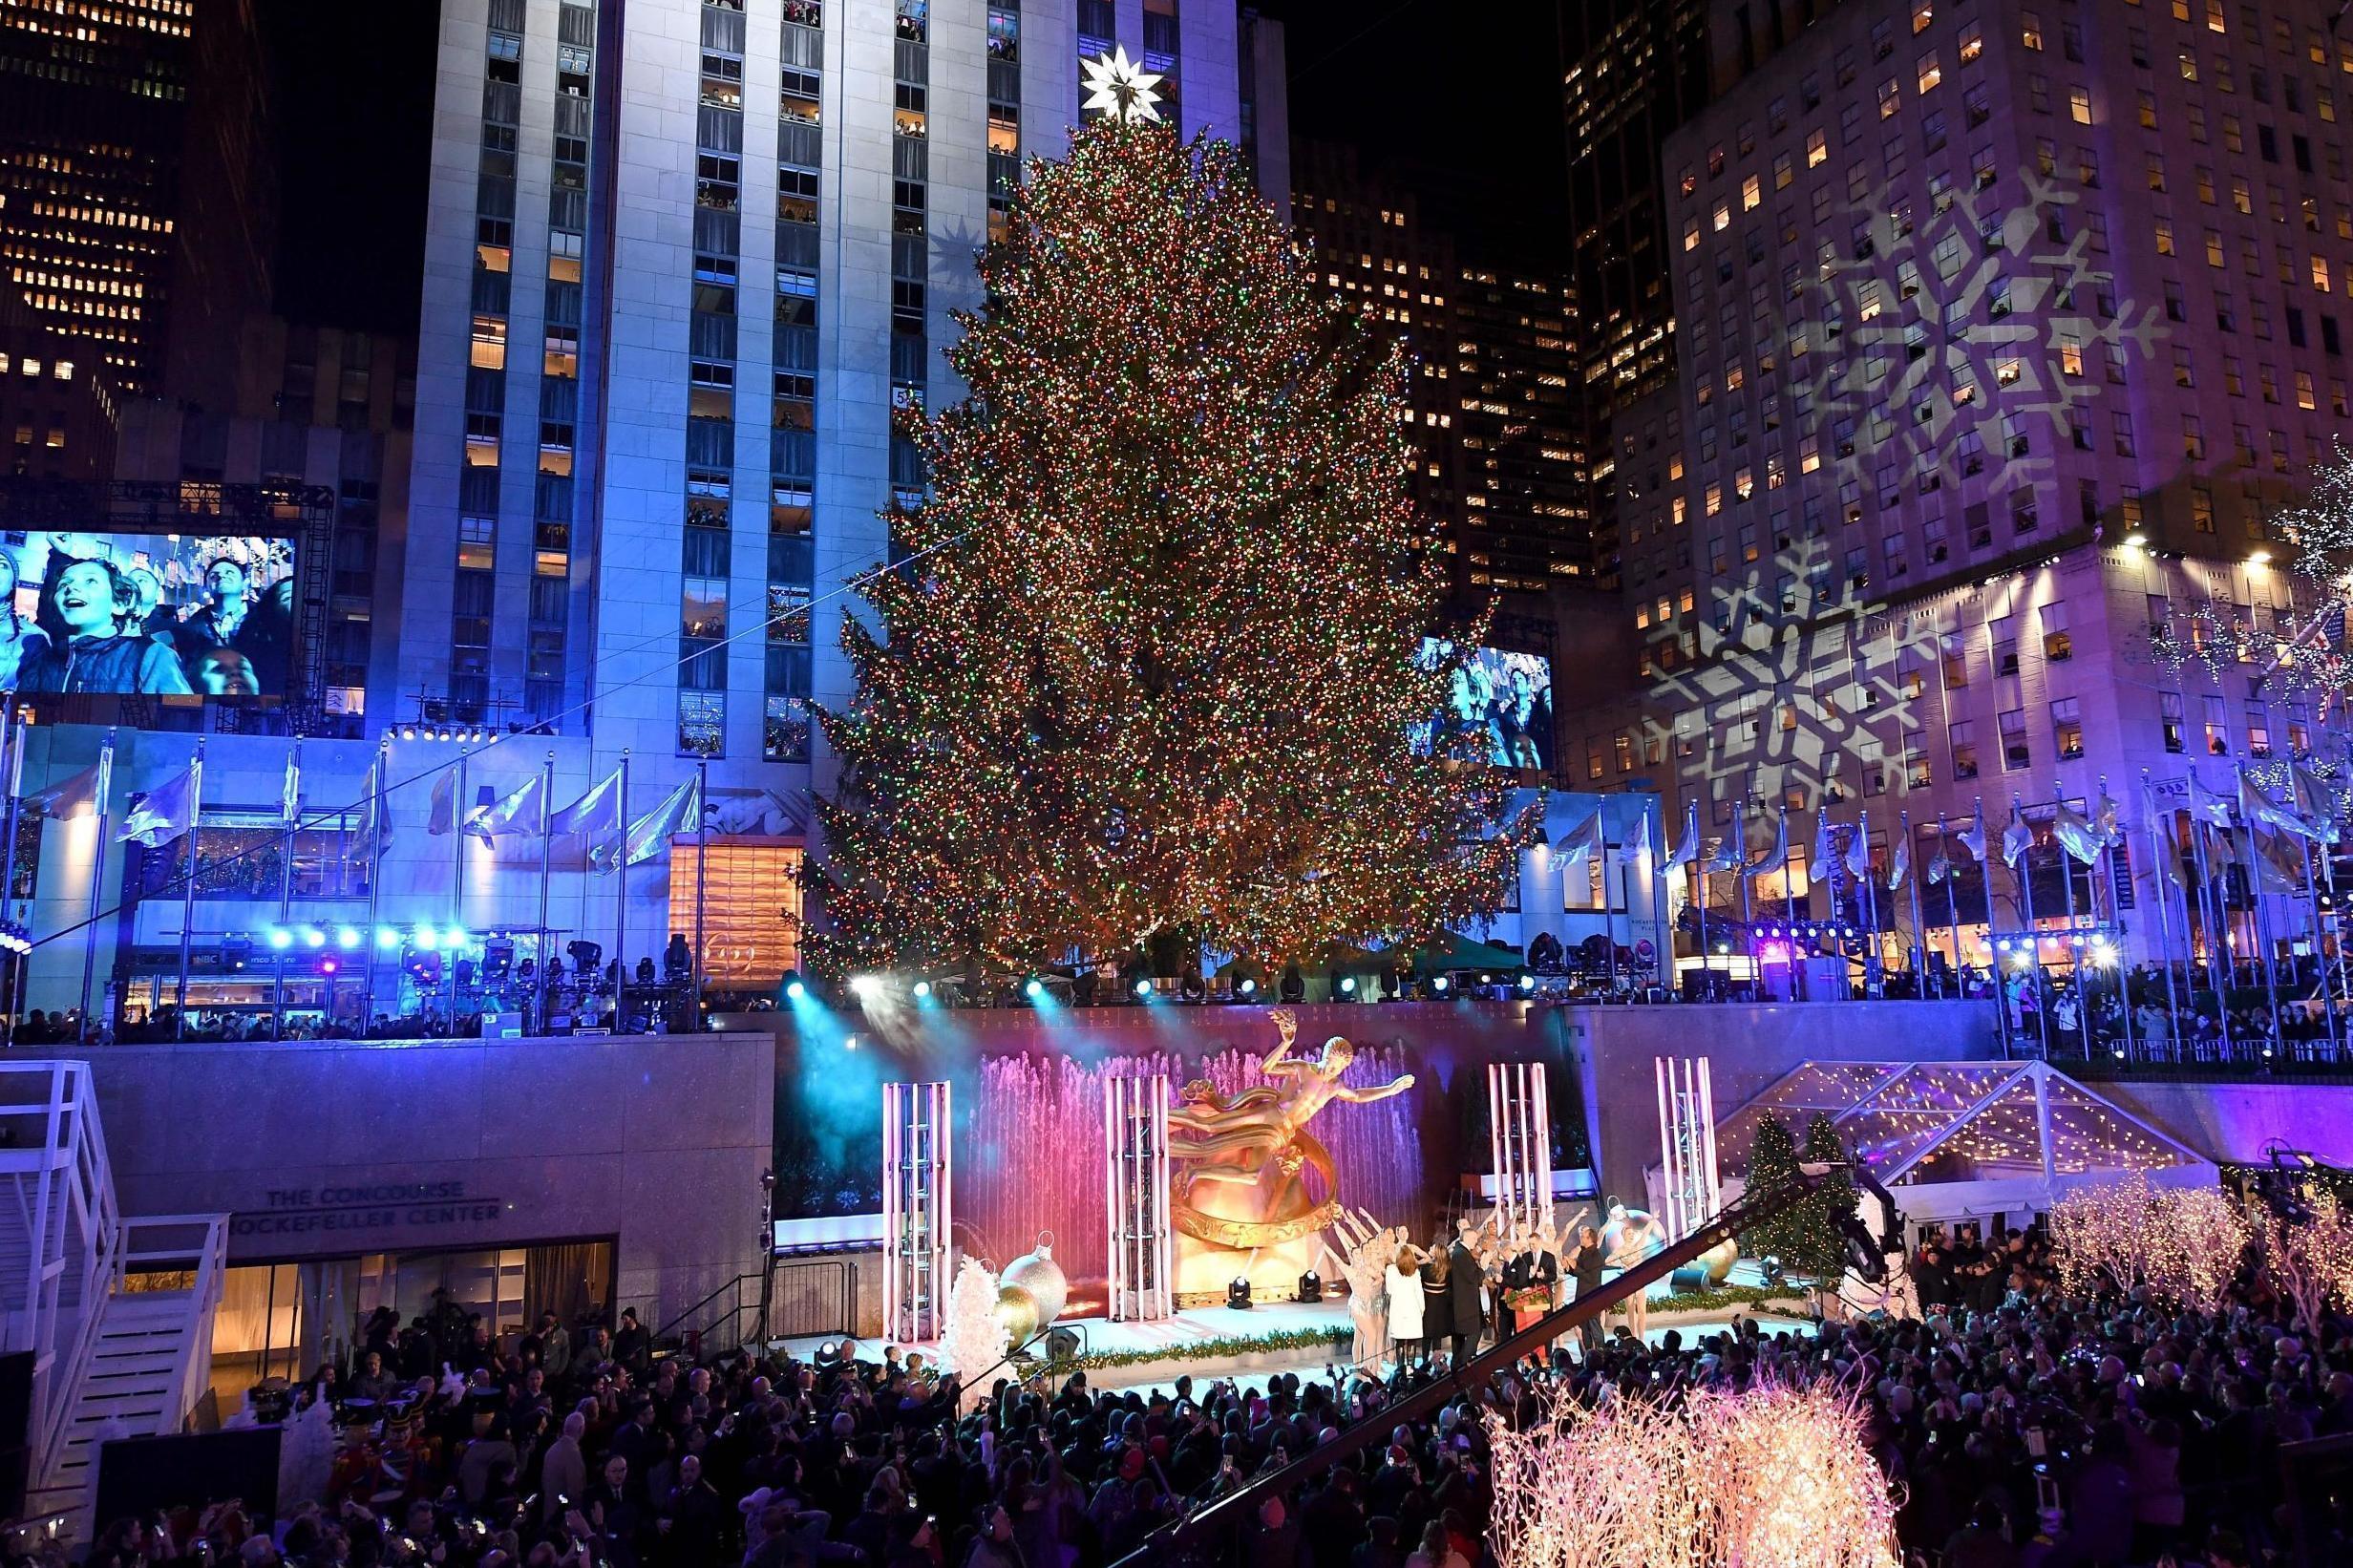 Rockefeller Tree Lighting 2018: Who's performing and how can you